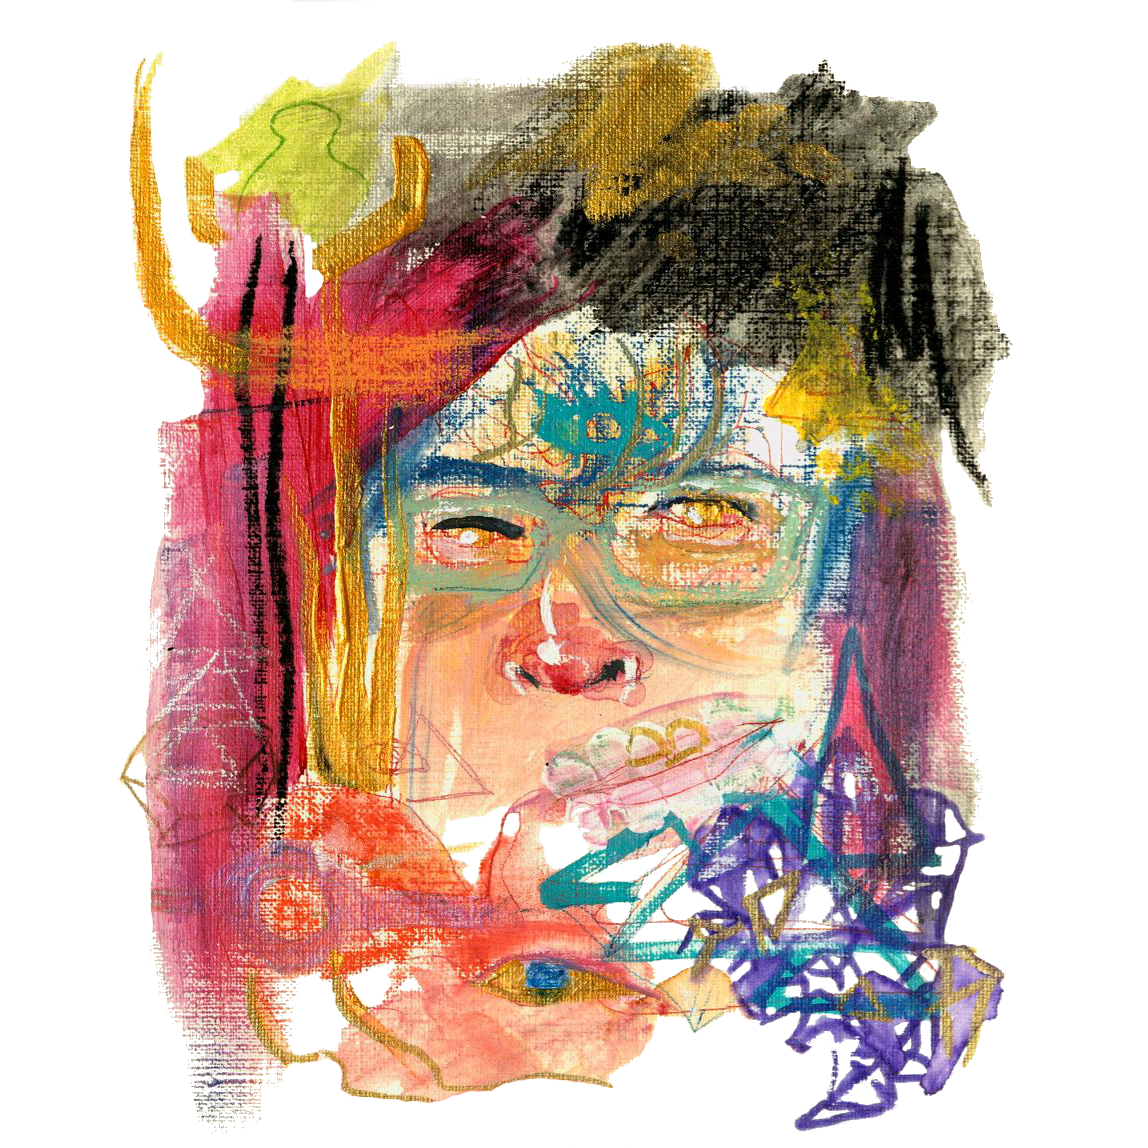 A colorful, surrealist painting depicting a pale face with glasses amidst a swirl of abstract colors and shapes.